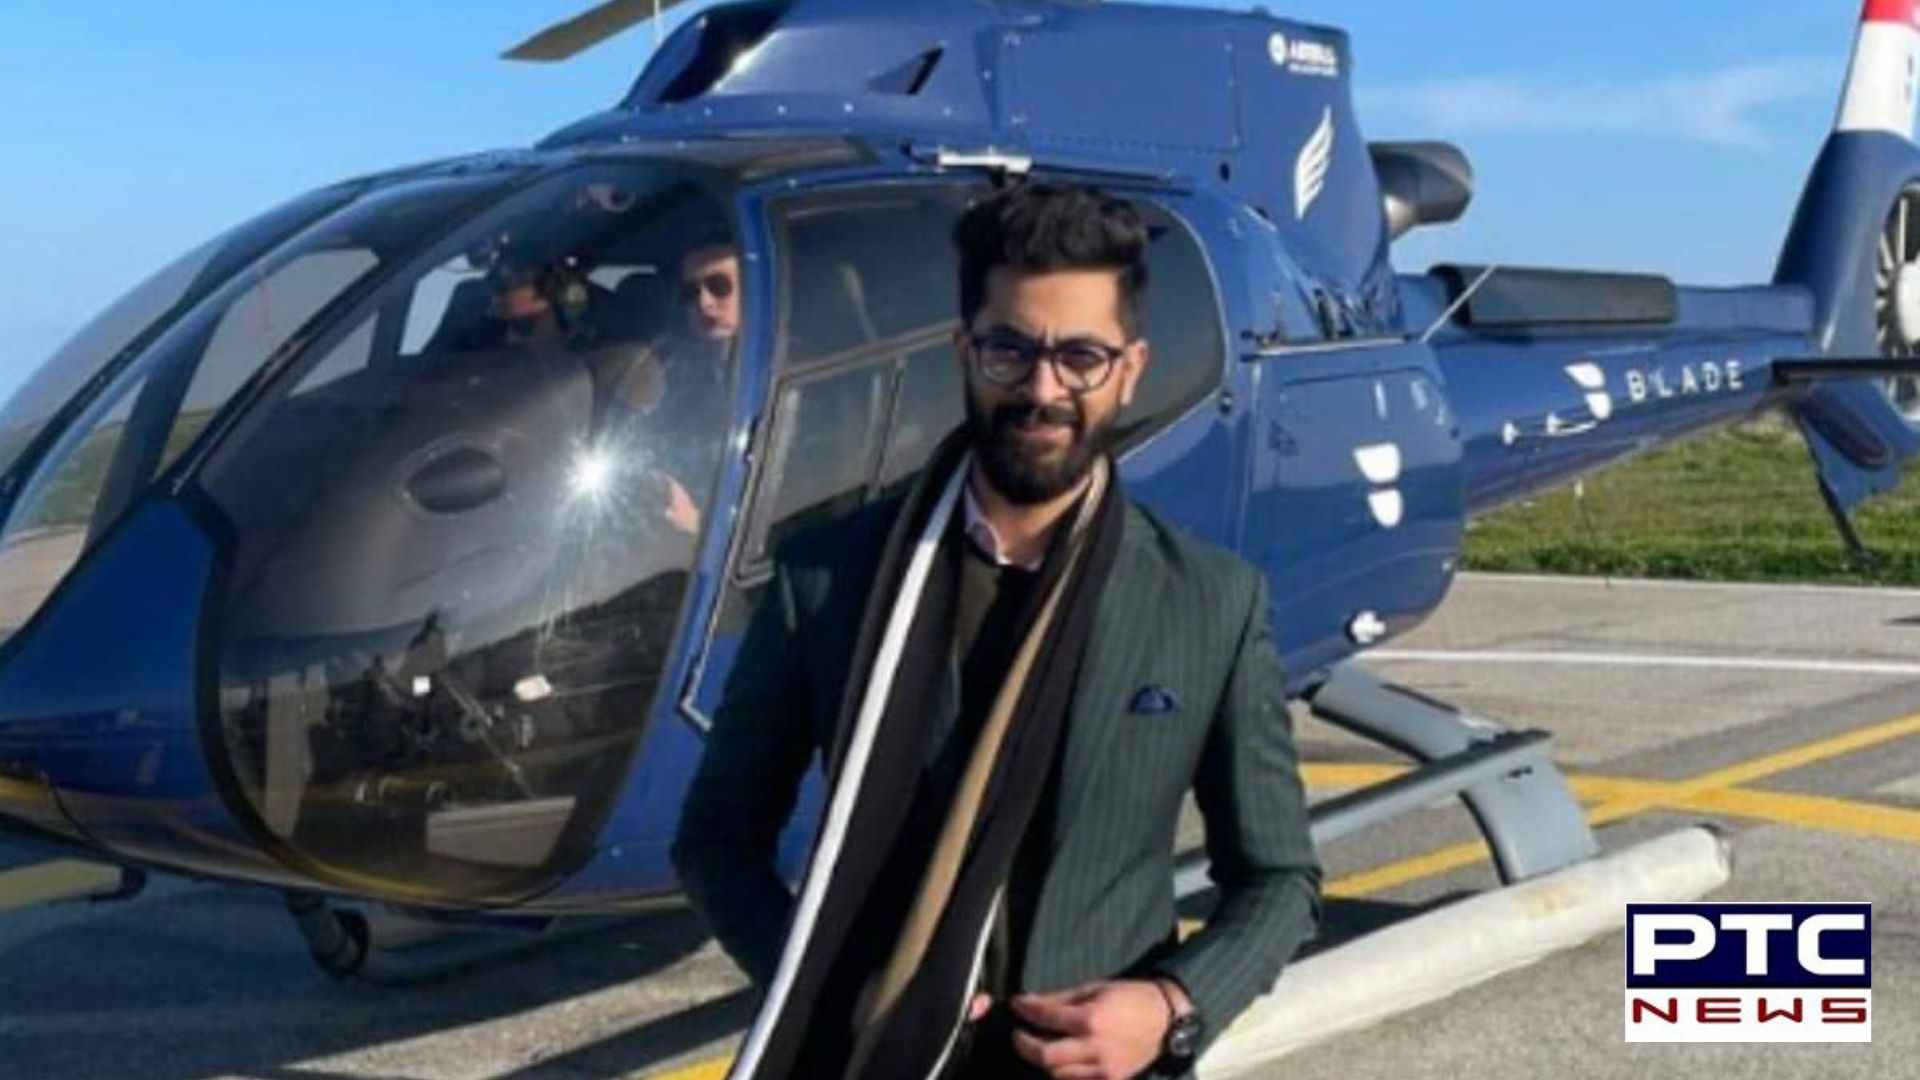 At 27, India's youngest billionaire creates Rs 9,800 crore company in 90 days